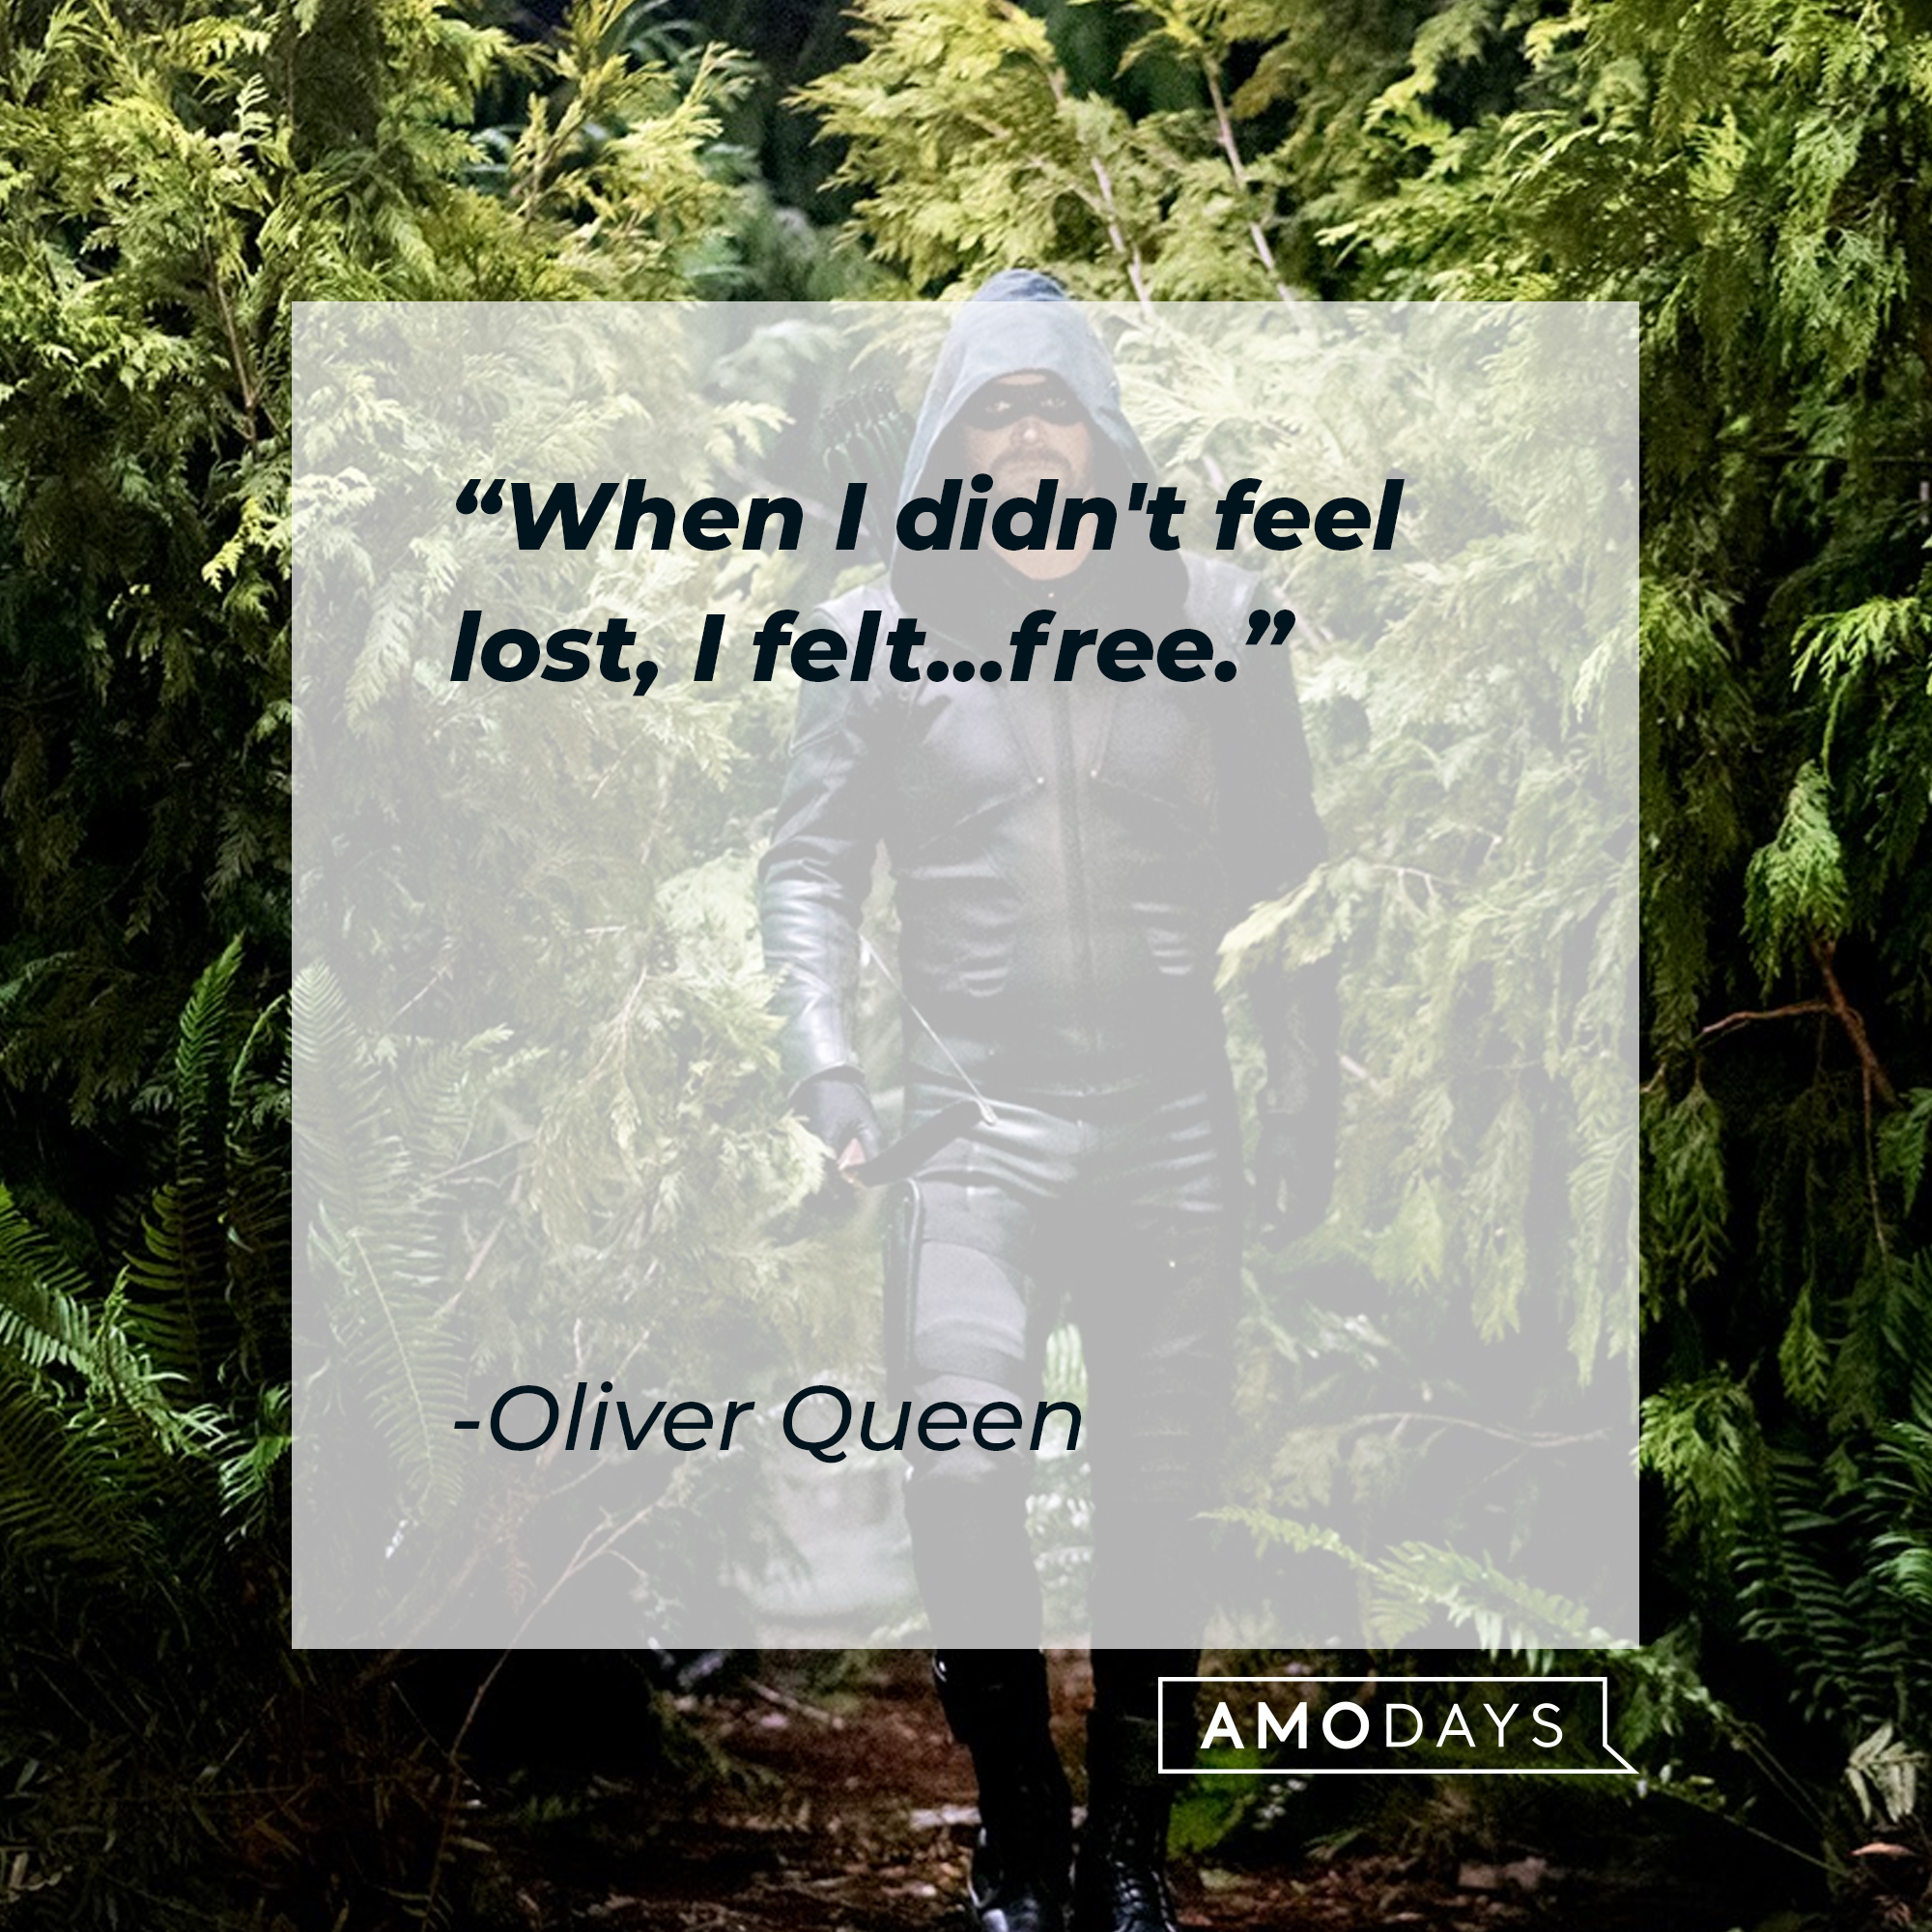 An image of Oliver Queen with his quote: “When I didn't feel lost, I felt...free.” |  Source: facebook.com/CWArrow